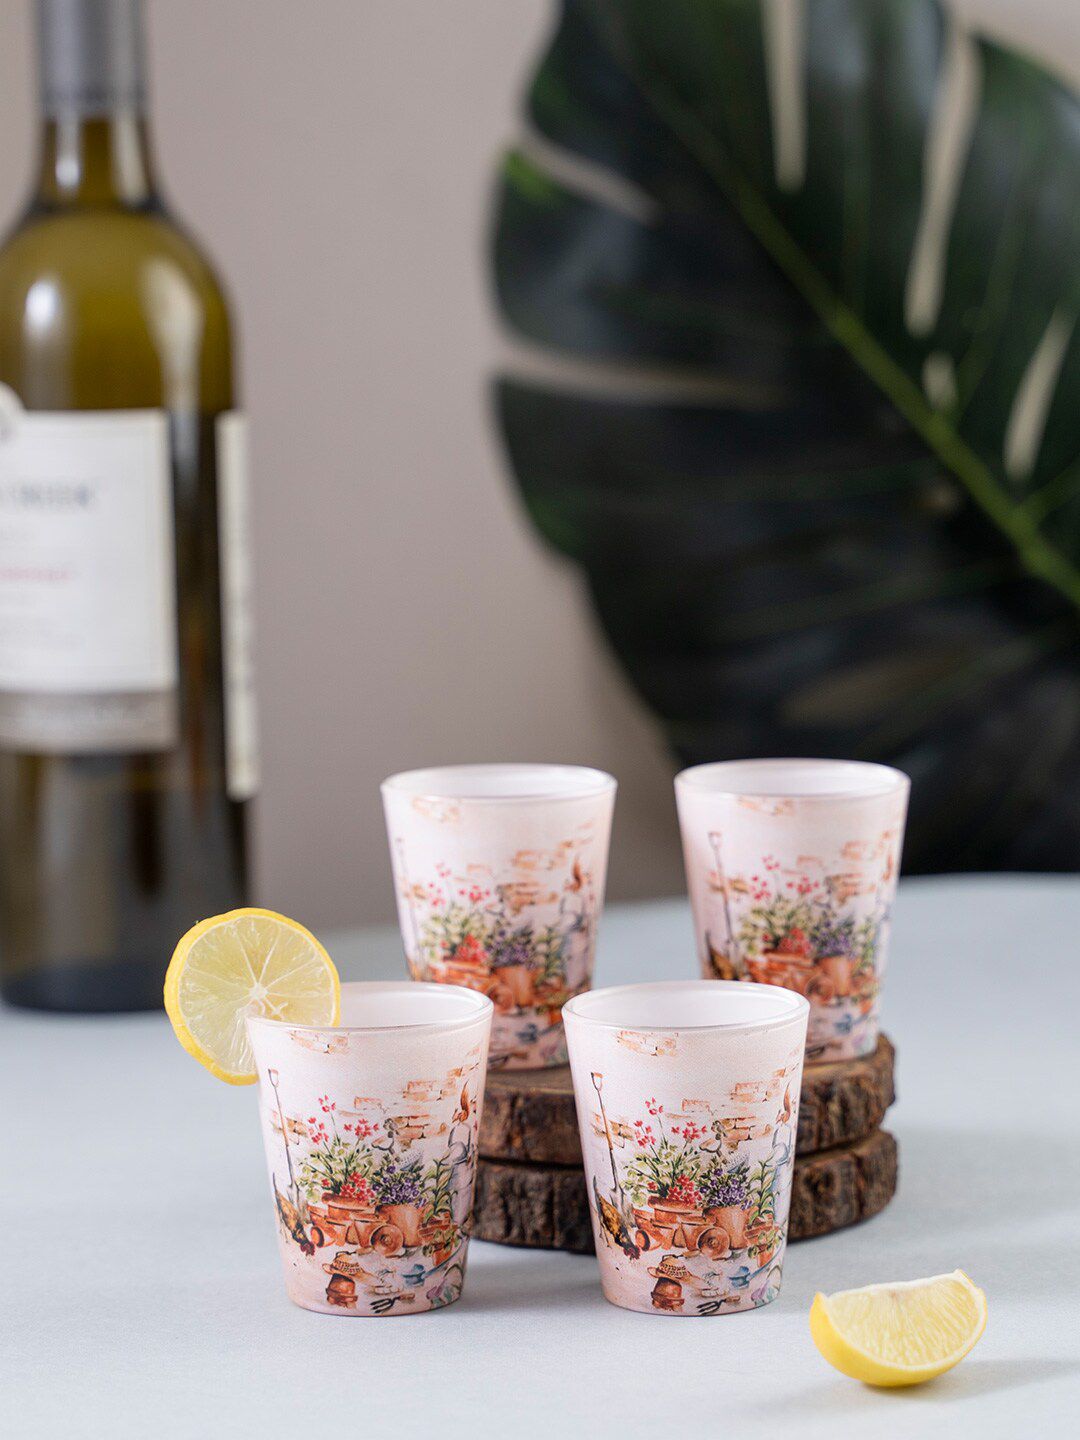 KOLOROBIA Set of 4 Beige & Brown English Themed Garden Shot Glasses 30 ml Price in India